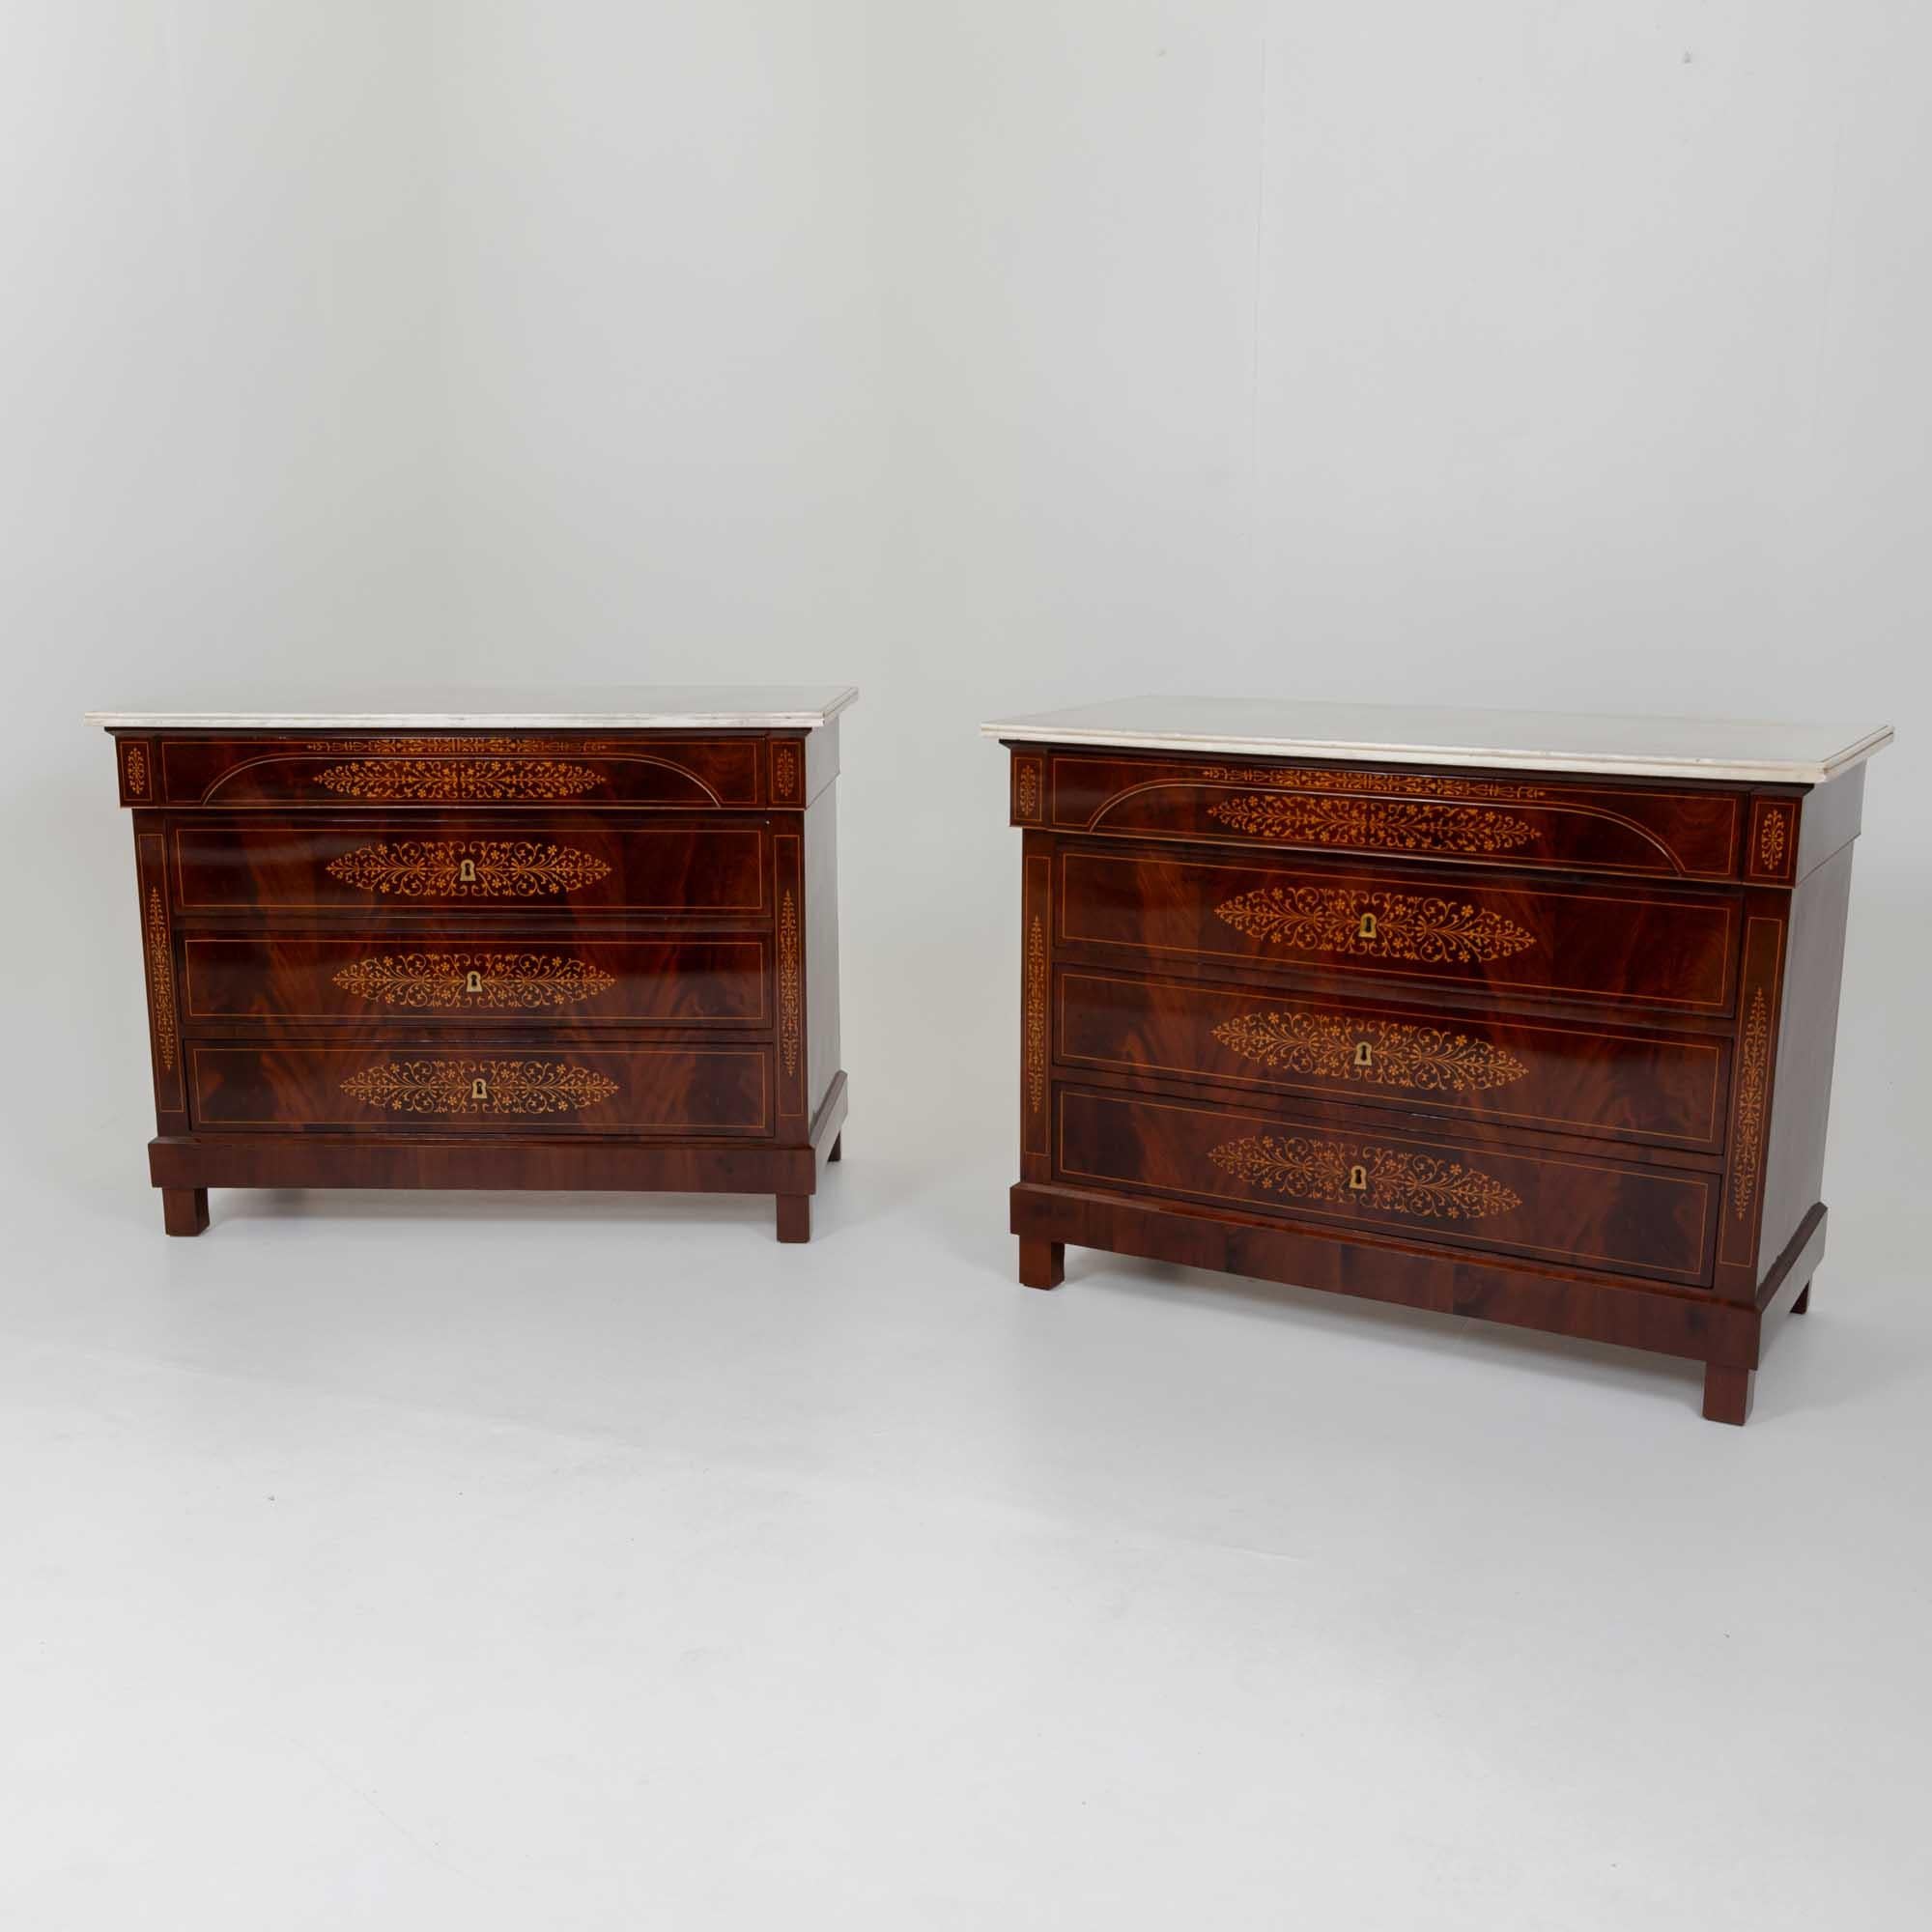 Pair of Charles X chests of drawers in mahogany veneer with white profiled marble tops and fine maple inlays on the front of the drawers as well as the pilasters. The chests are fitted with four drawers, the top drawer being slightly different in